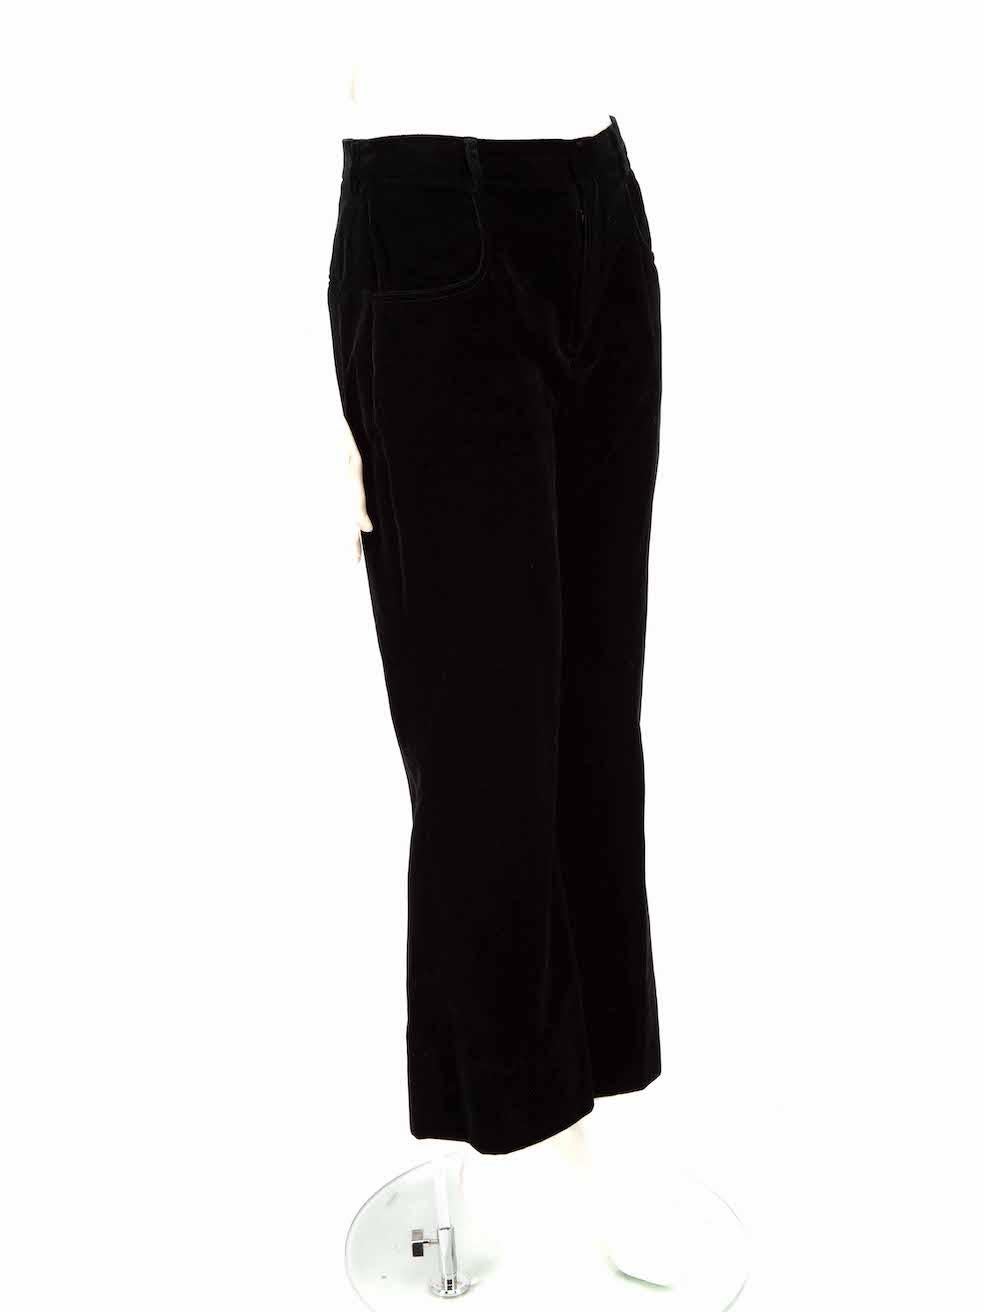 CONDITION is Very good. Hardly any visible wear to the trousers is evident on this used Saint Laurent designer resale item.
 
 
 
 Details
 
 
 Black
 
 Velvet
 
 Straight leg trousers
 
 High rise
 
 Front zip closure with button and clasp
 
 Belt